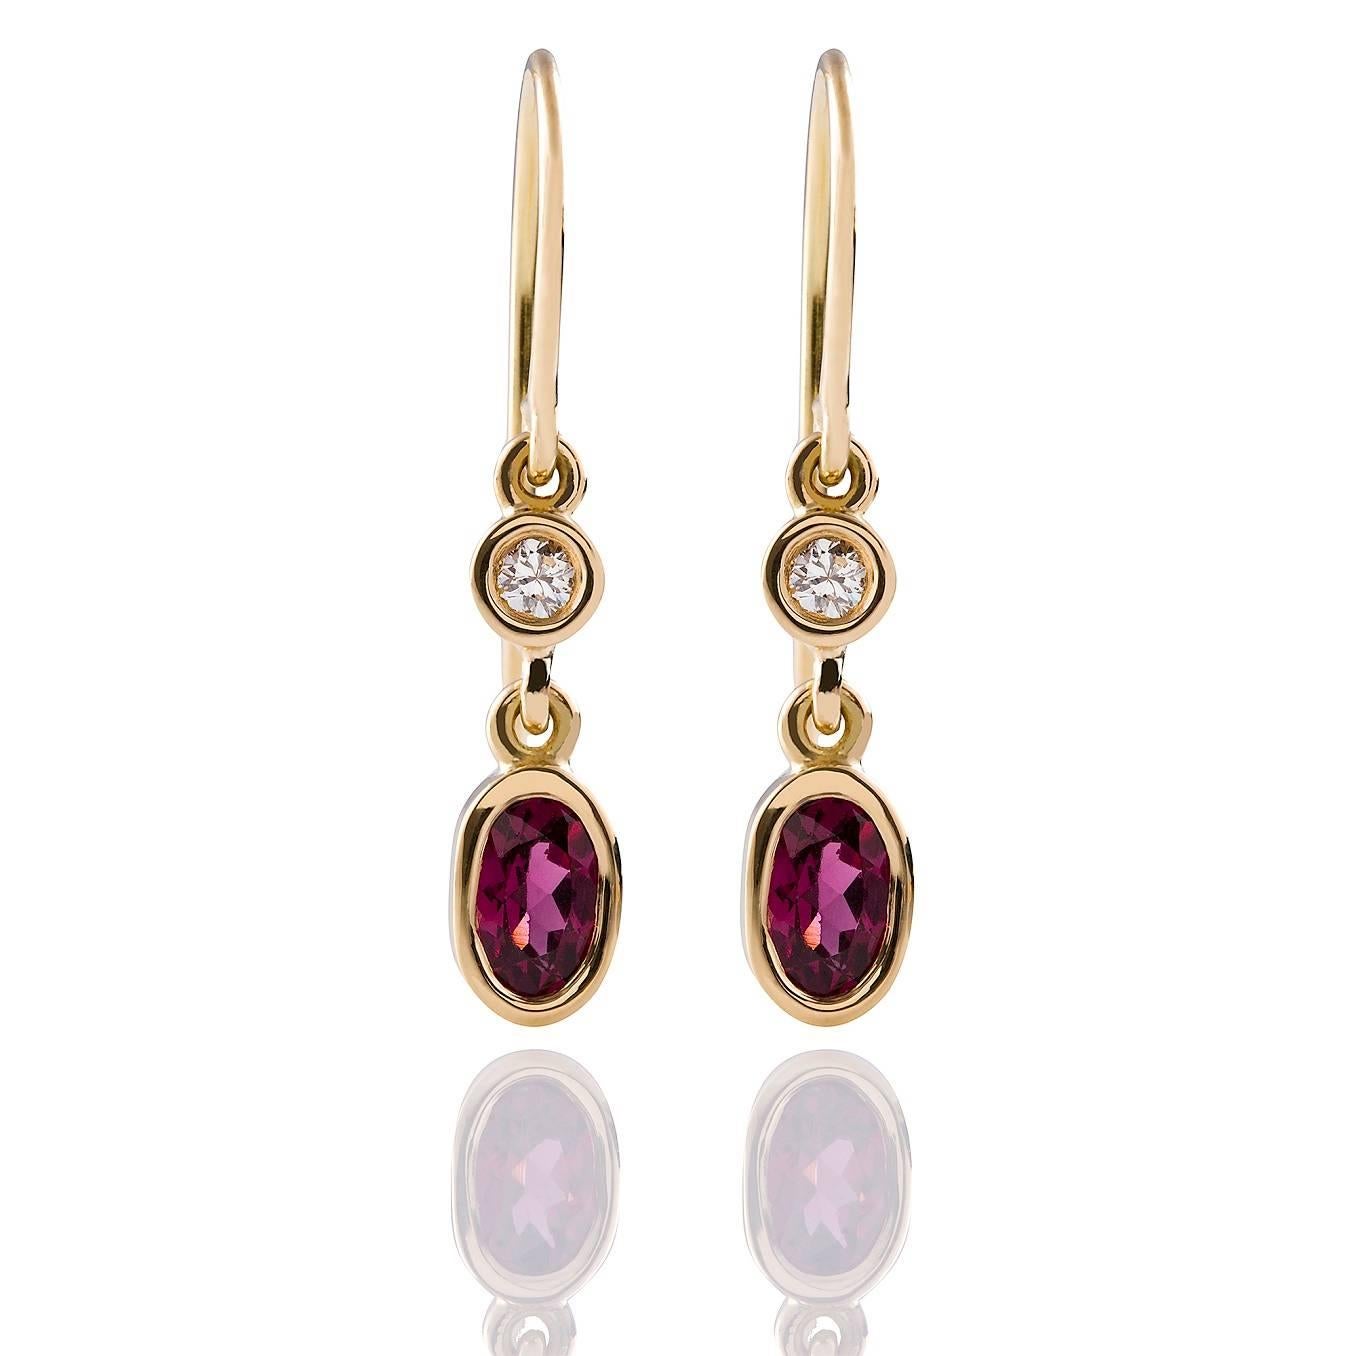 Rosa Granato Earrings

These gorgeous drop style earrings in 18ct yellow gold each have a beautiful chenier set rhodolite garnet and diamond pair.

Oval faceted rhodolite garnets: medium pink colour, 6.0 x 4.0mm each

Round brilliant cut diamonds: G